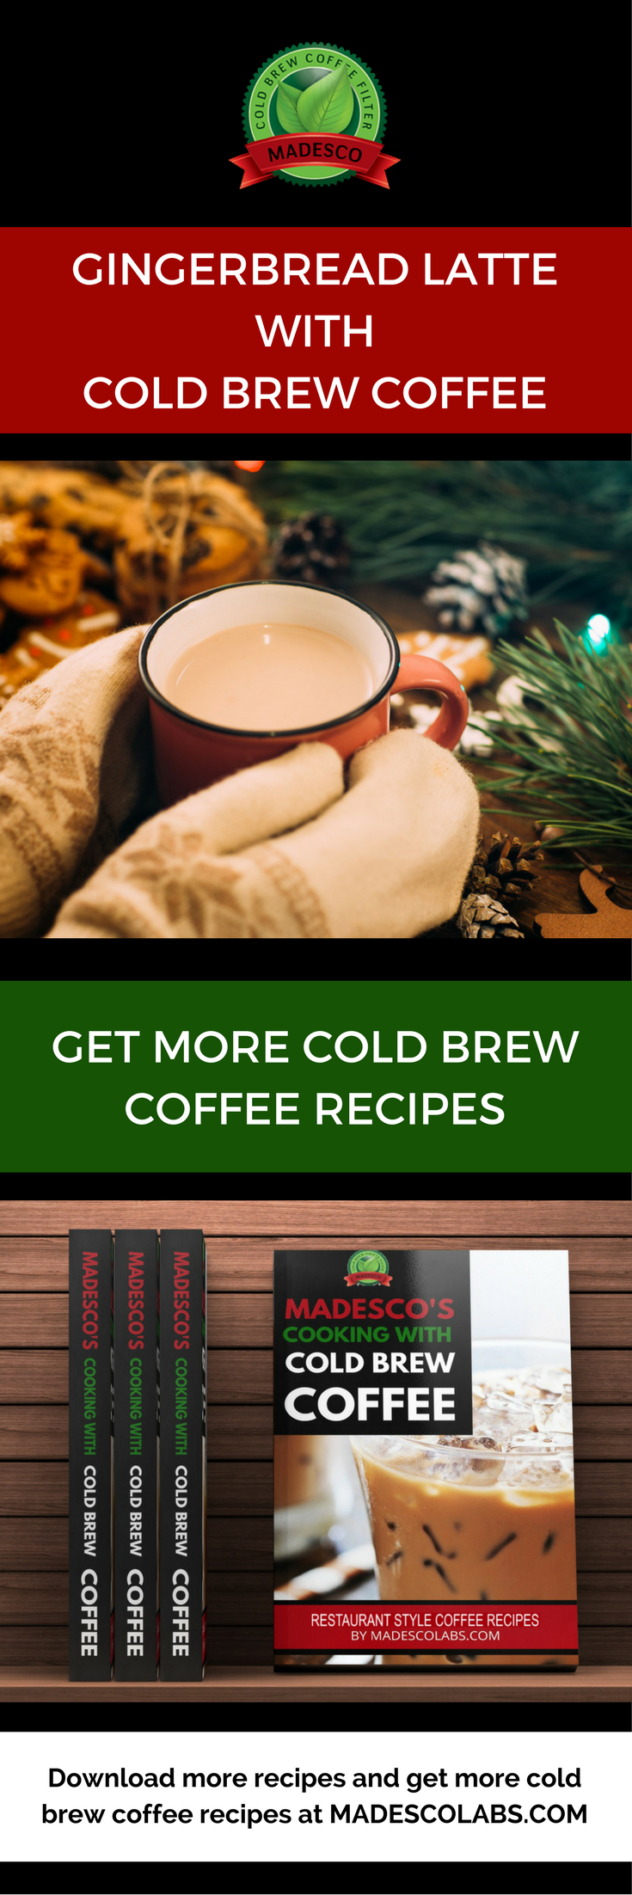 COLD BREW COFFEE - GINGERBREAD LATTE